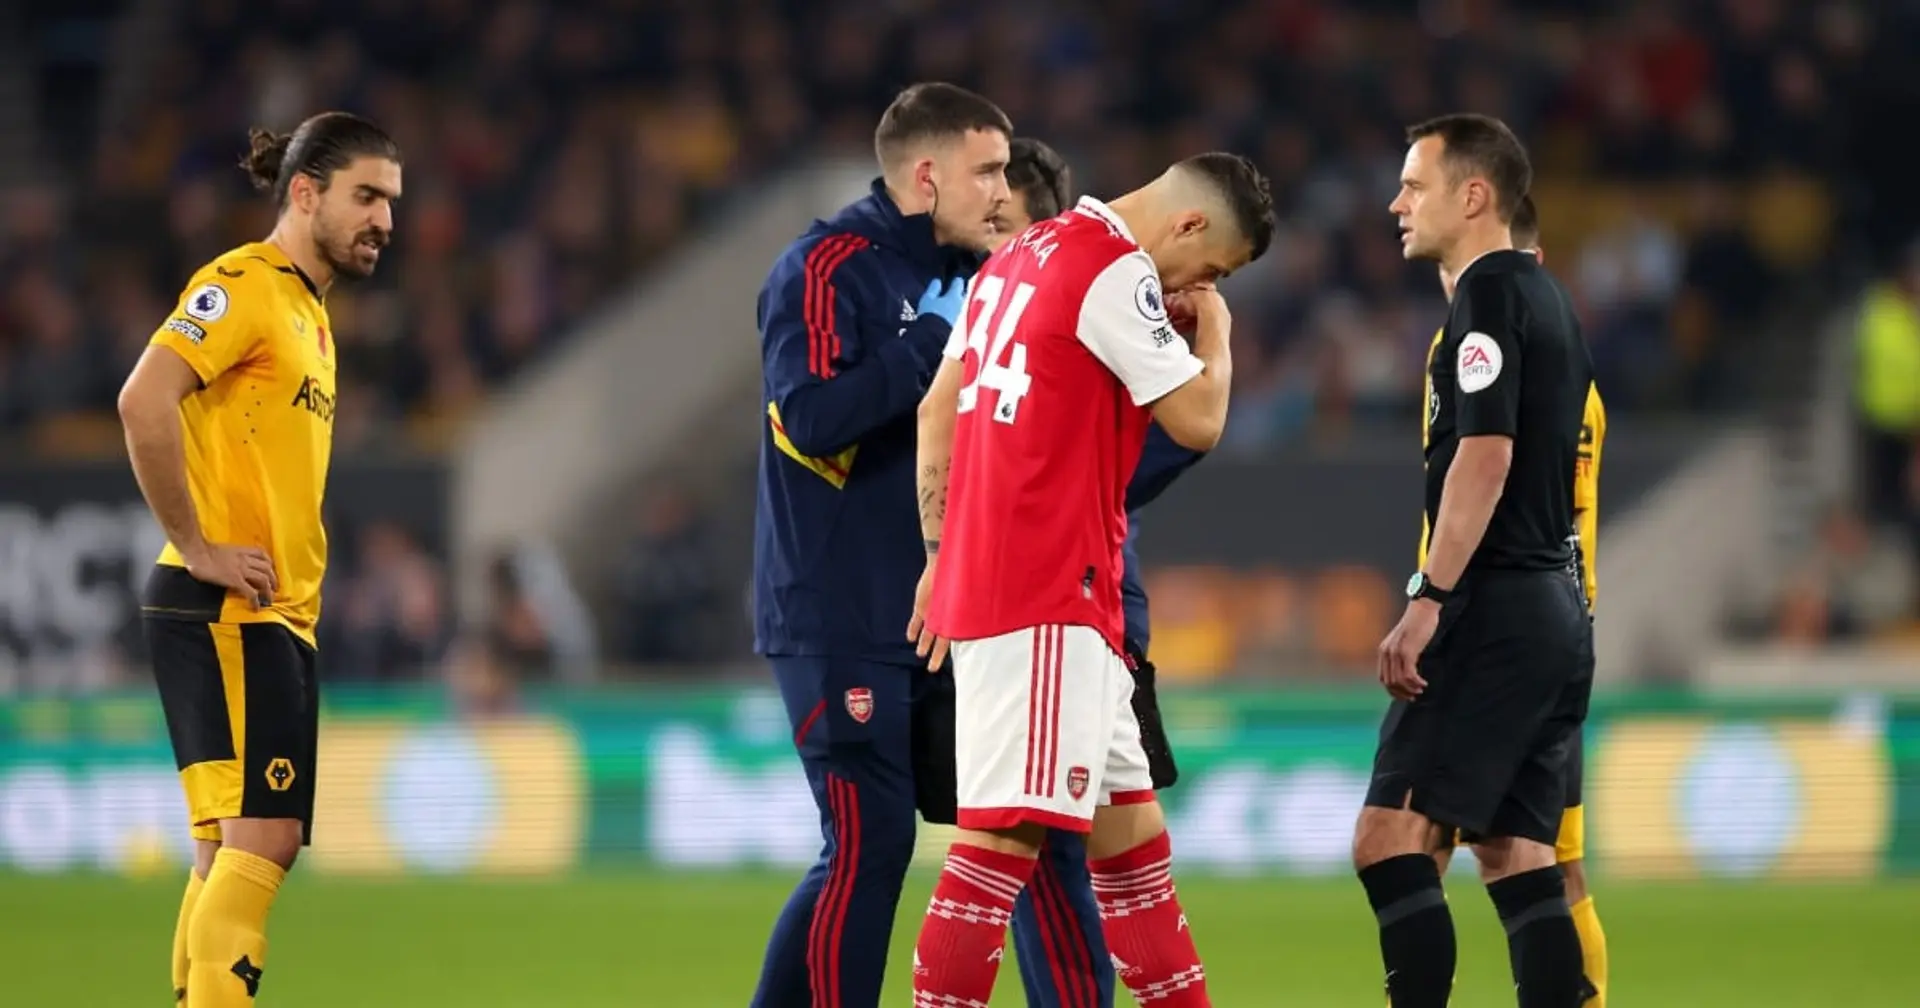 Xhaka not injured: Reason for early substitution against Wolves revealed 